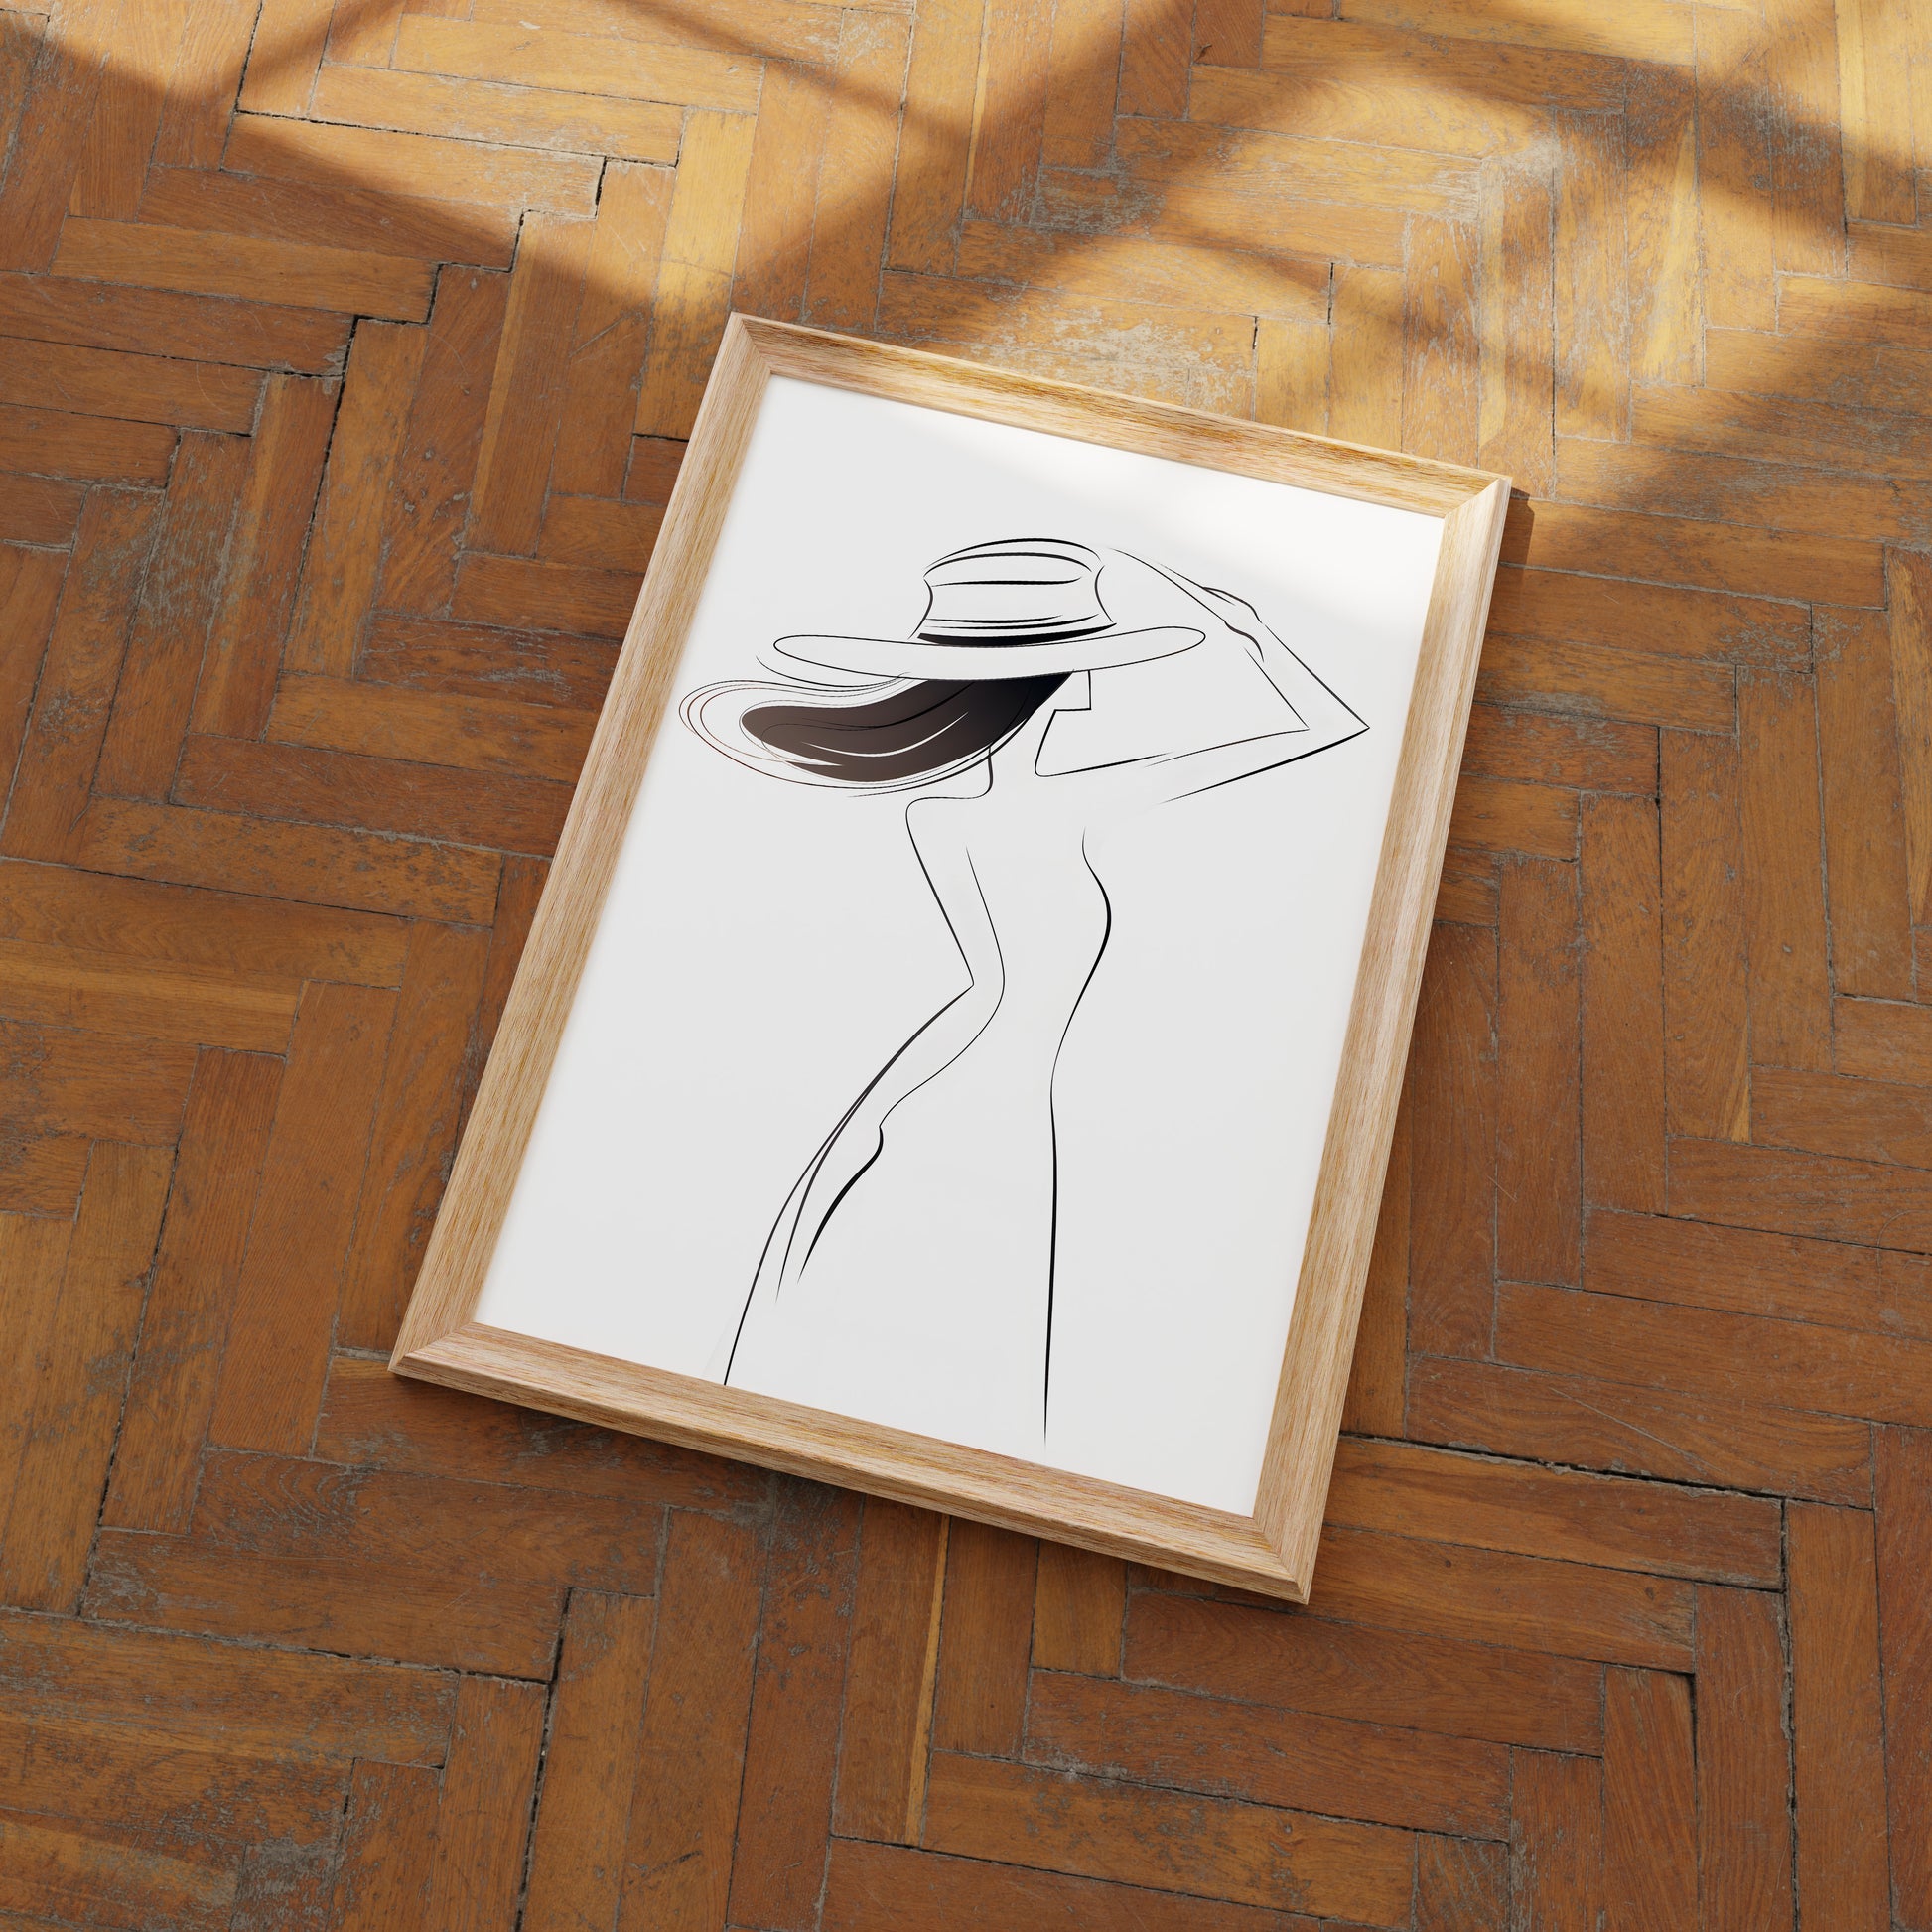 Elegant line art of a woman with a hat in a frame on a herringbone wood floor.